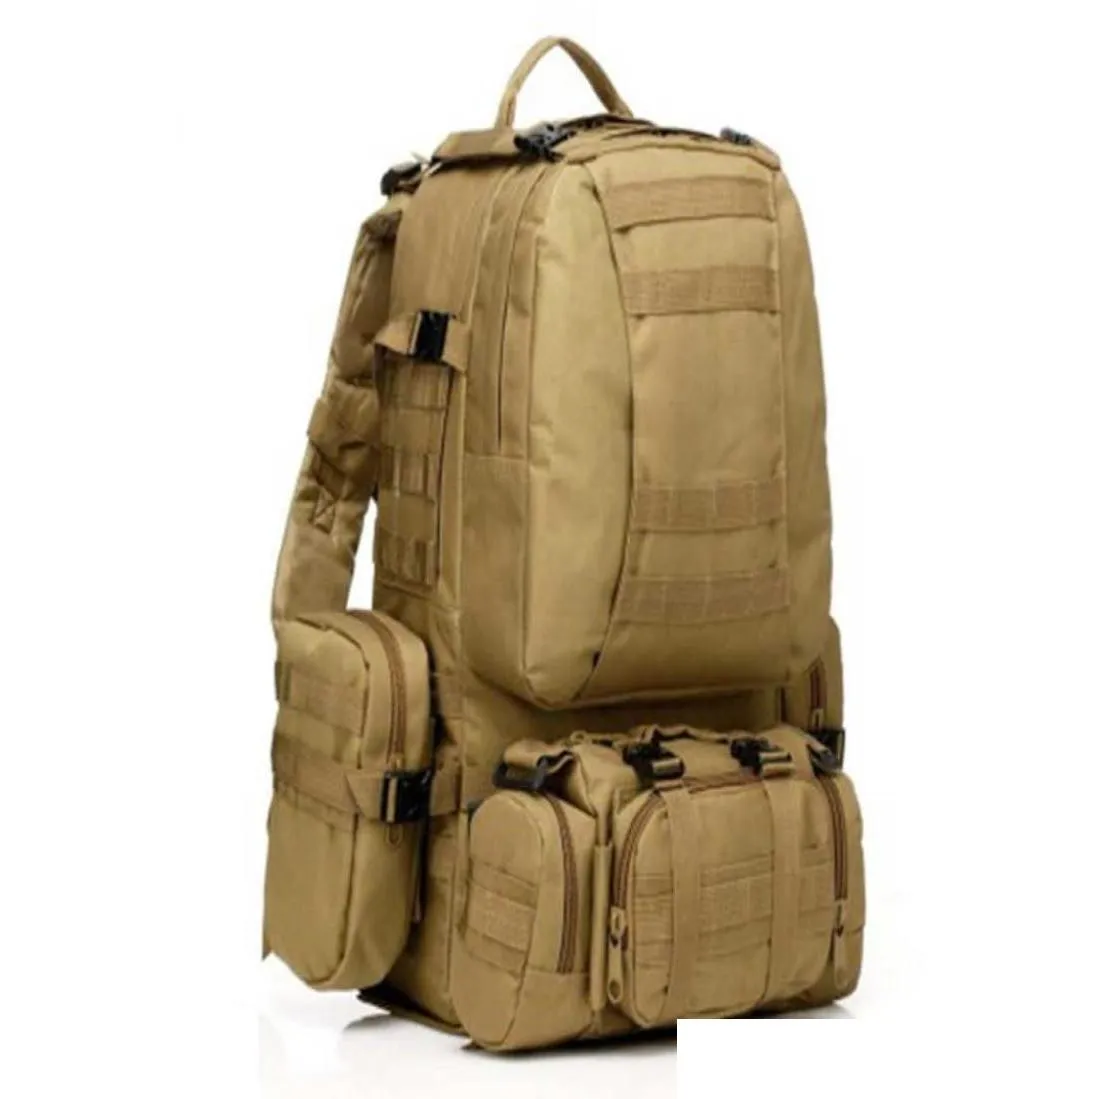 50L Military Tactical Backpack 4 in 1 Rucksack Bag Molle Camping Hiking Outdoor Climbing Travel Bag Army Multifunction Backpack